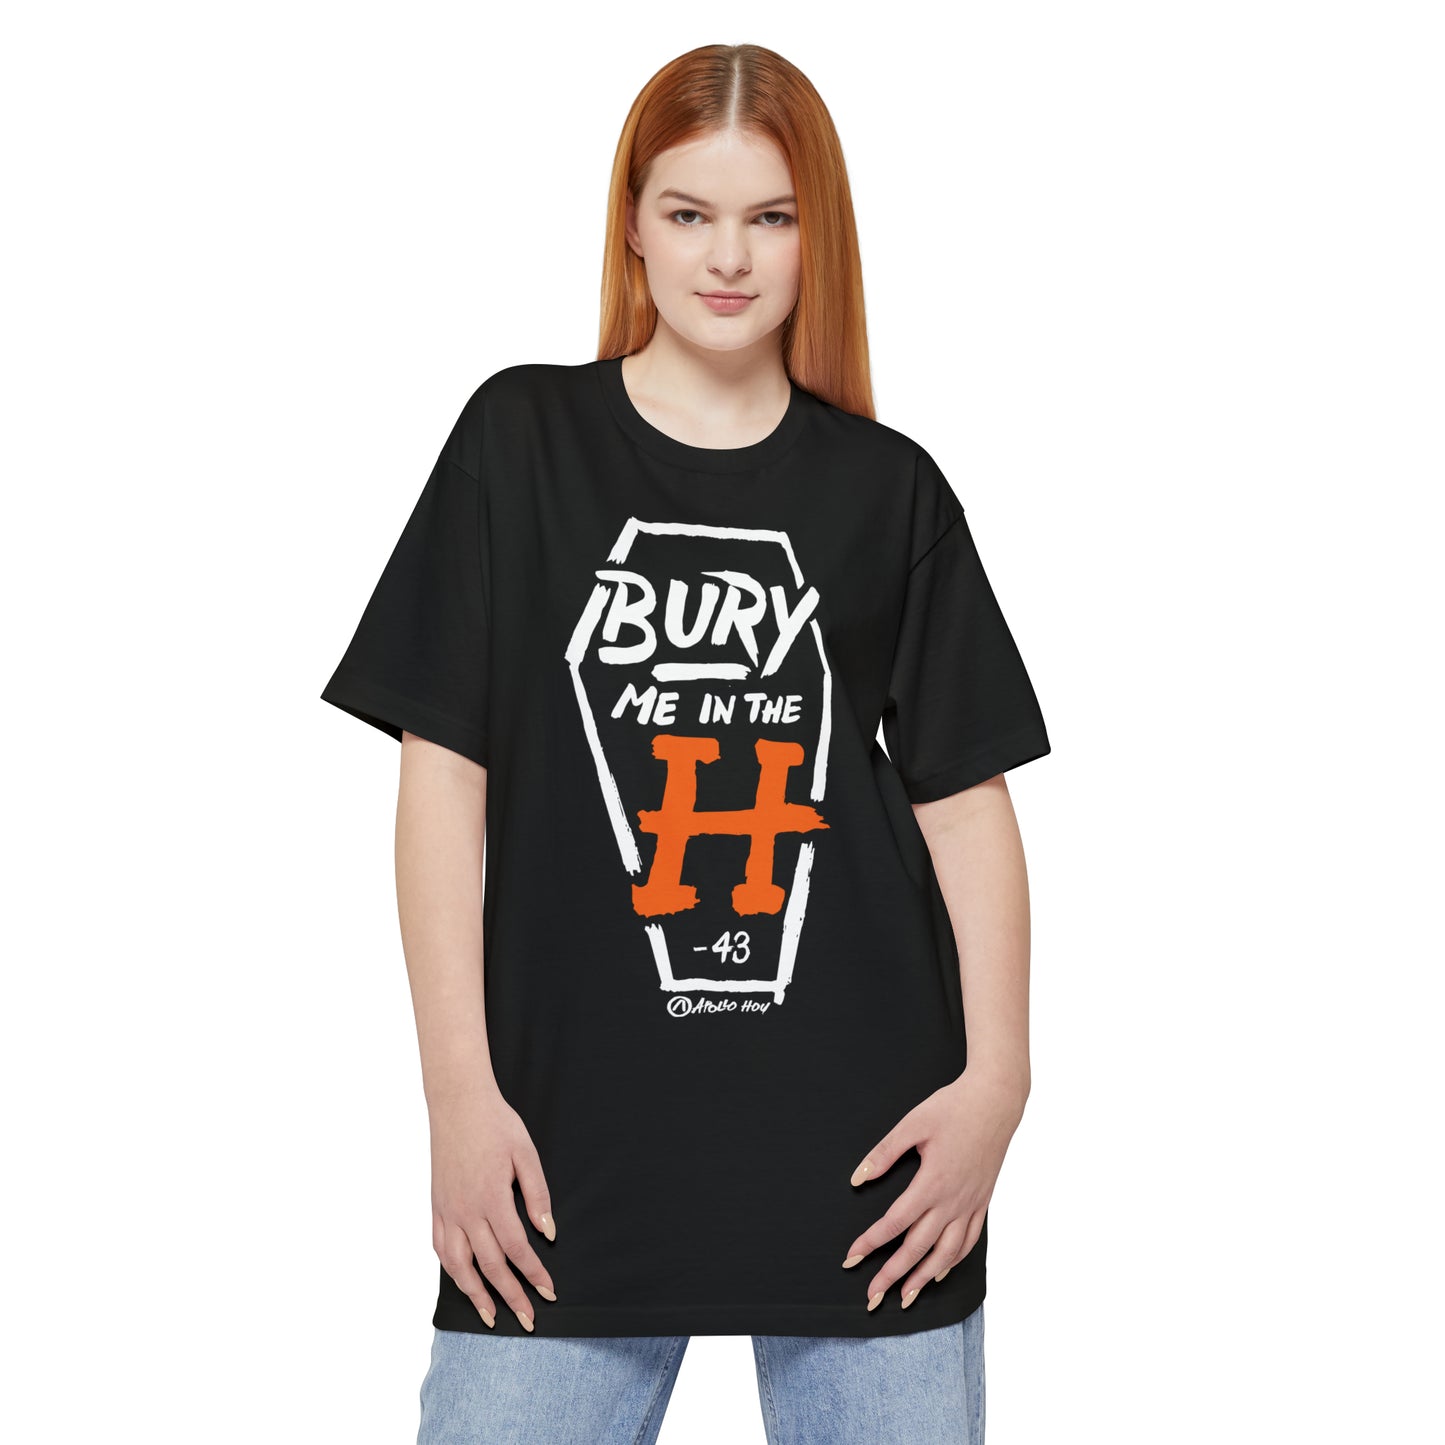 Bury Me In The H (coffin variant) BIG & TALL Unisex Tall Beefy-T® T-Shirt